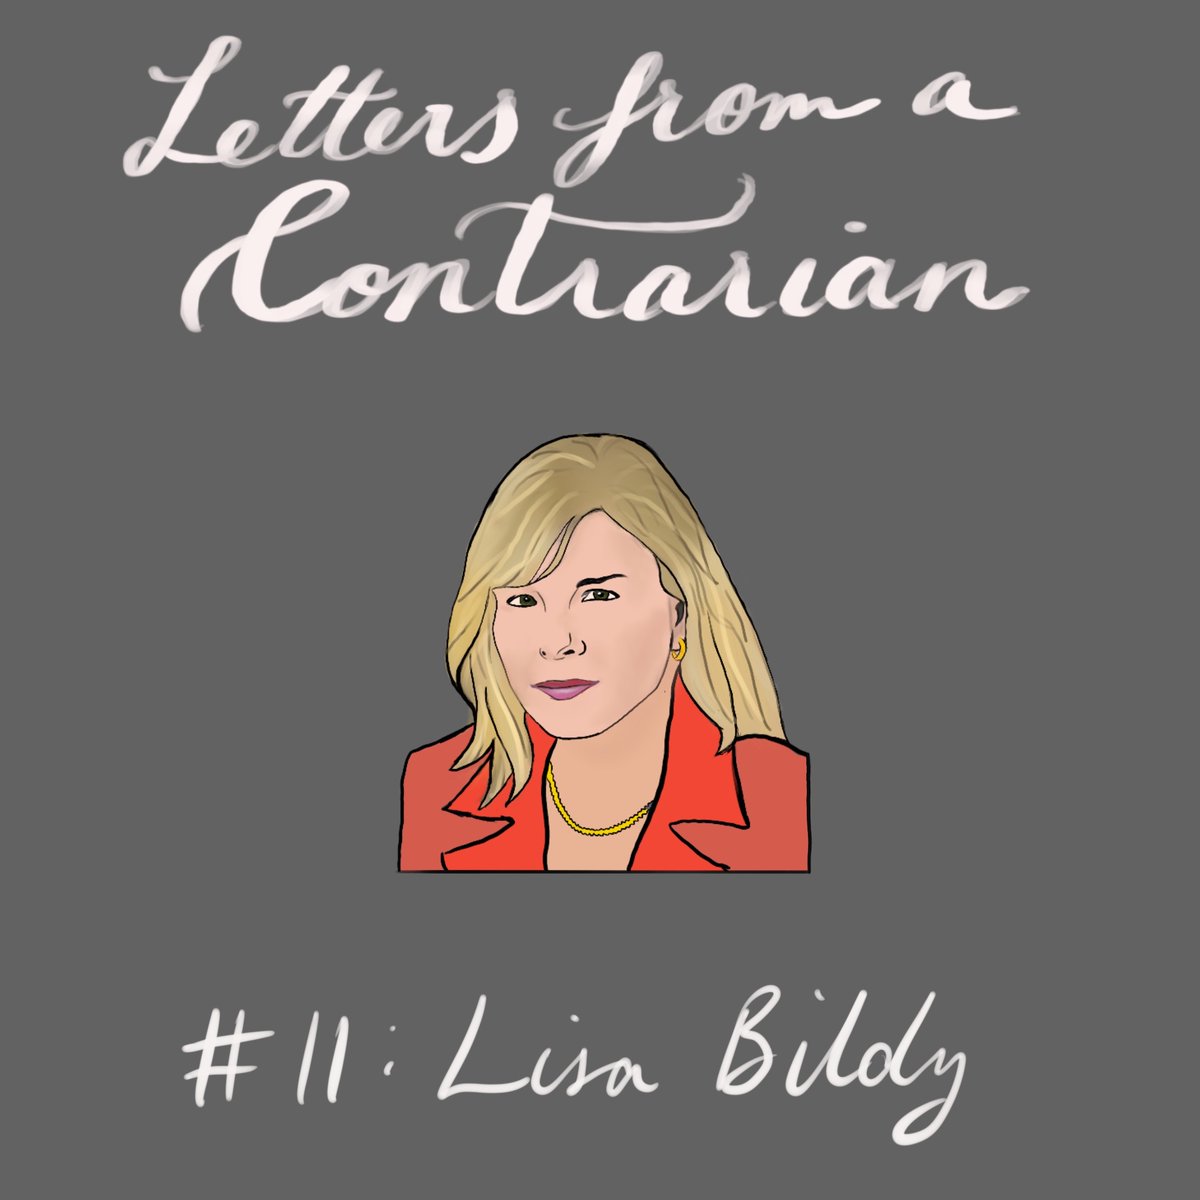 Thank you to  @LDBildy for coming onto my podcast! This is probably the most exciting one yet. Here's what I took away from our conversation.